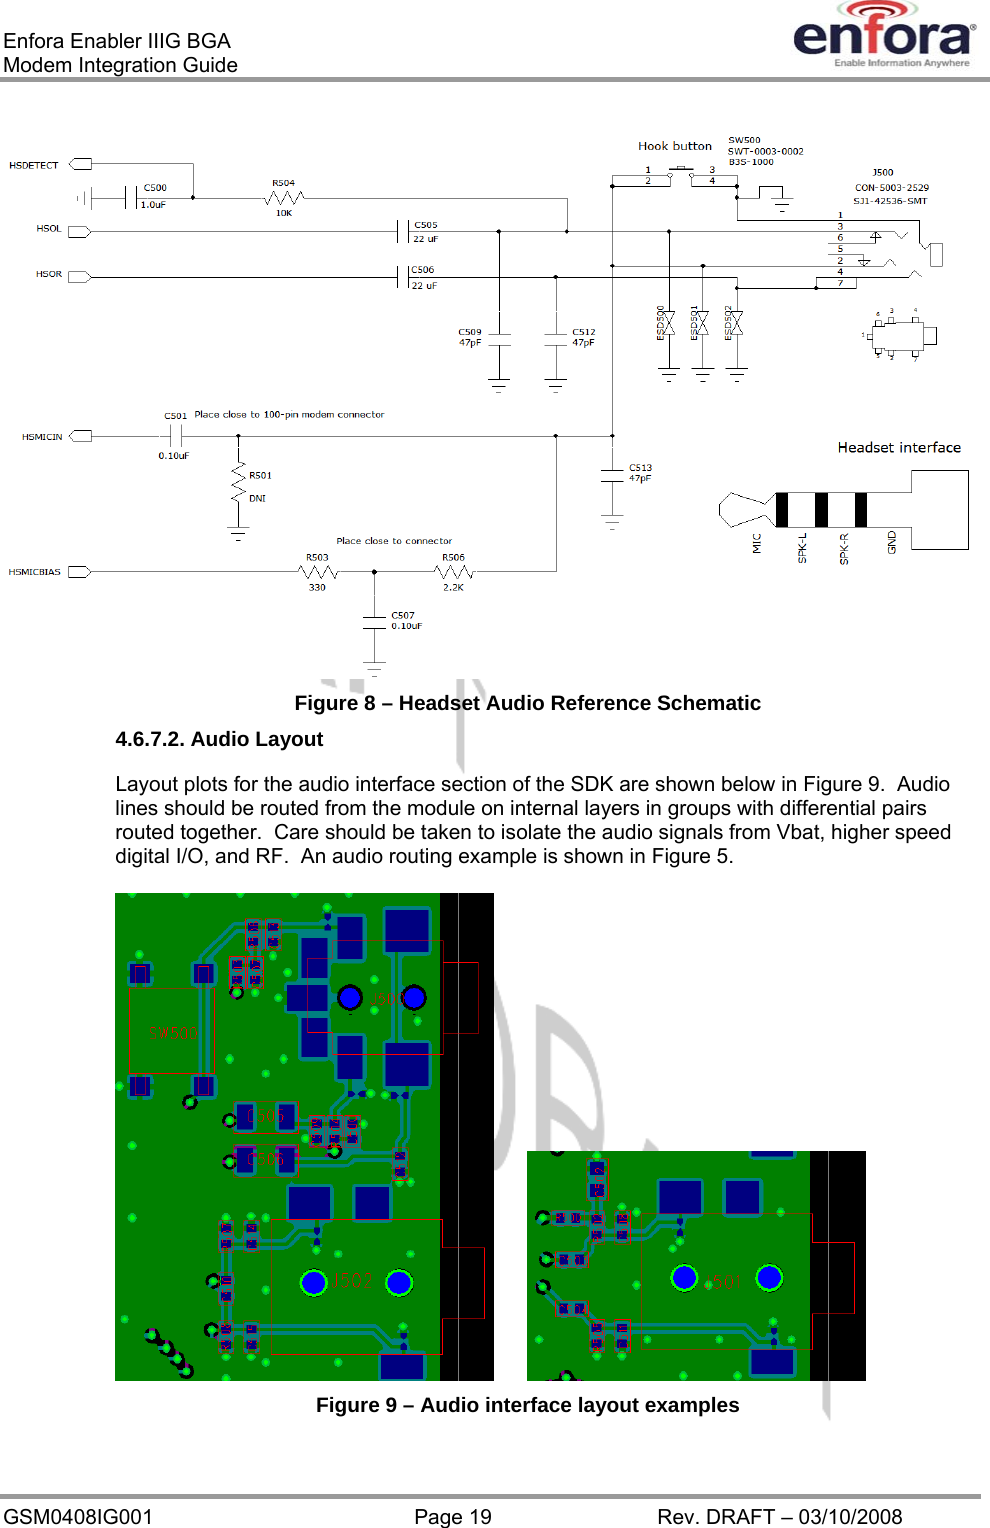 Enfora Enabler IIIG BGA Modem Integration Guide  Figure 8 – Headset Audio Reference Schematic 4.6.7.2. Audio Layout Layout plots for the audio interface section of the SDK are shown below in Figure 9.  Audio lines should be routed from the module on internal layers in groups with differential pairs routed together.  Care should be taken to isolate the audio signals from Vbat, higher speed digital I/O, and RF.  An audio routing example is shown in Figure 5.    Figure 9 – Audio interface layout examples GSM0408IG001  Page 19  Rev. DRAFT – 03/10/2008 